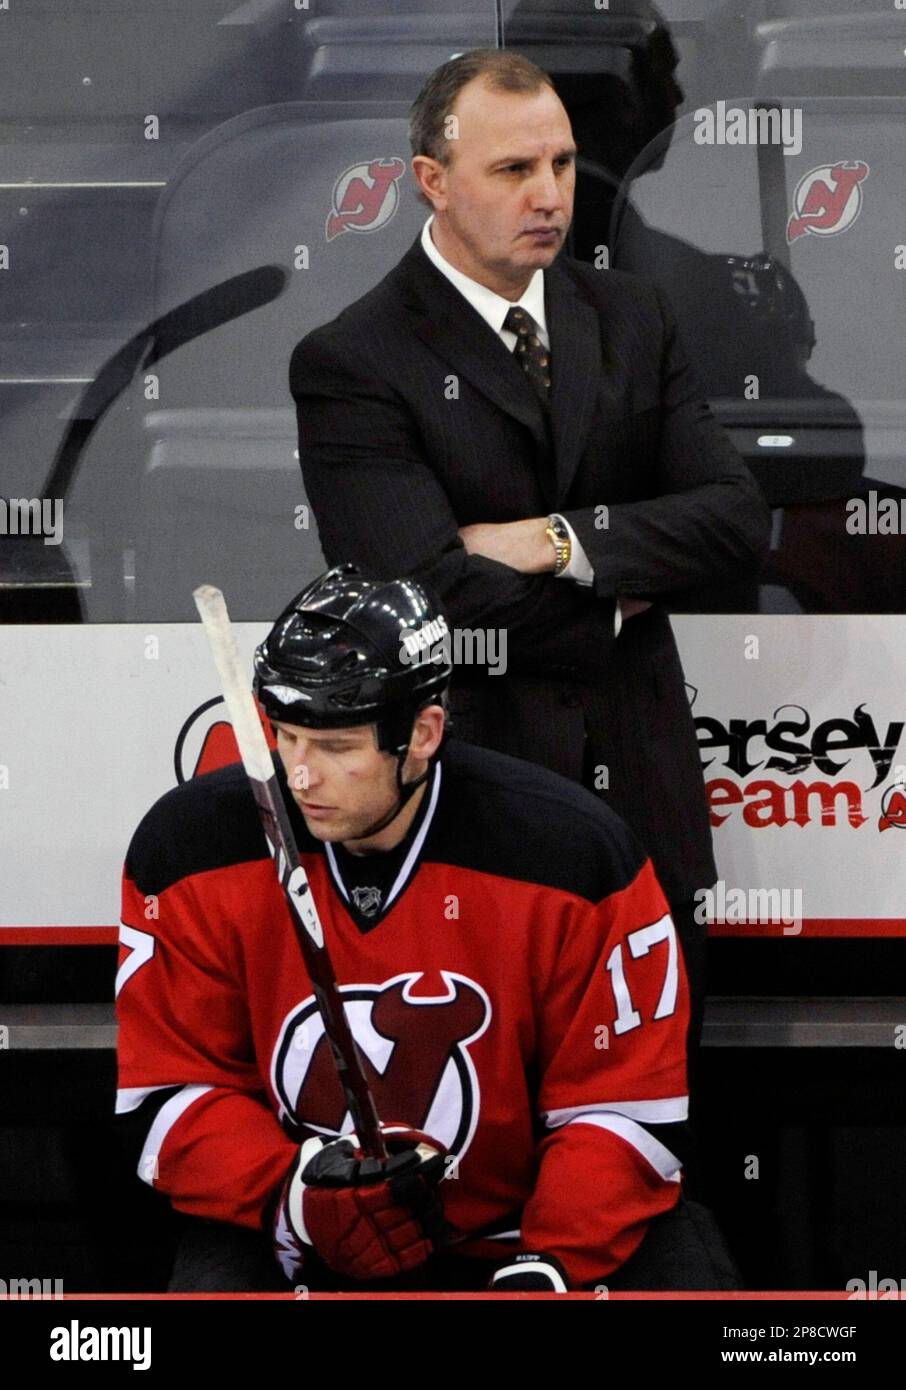 FILE - In this April 7, 2009, file photo, New Jersey Devils coach